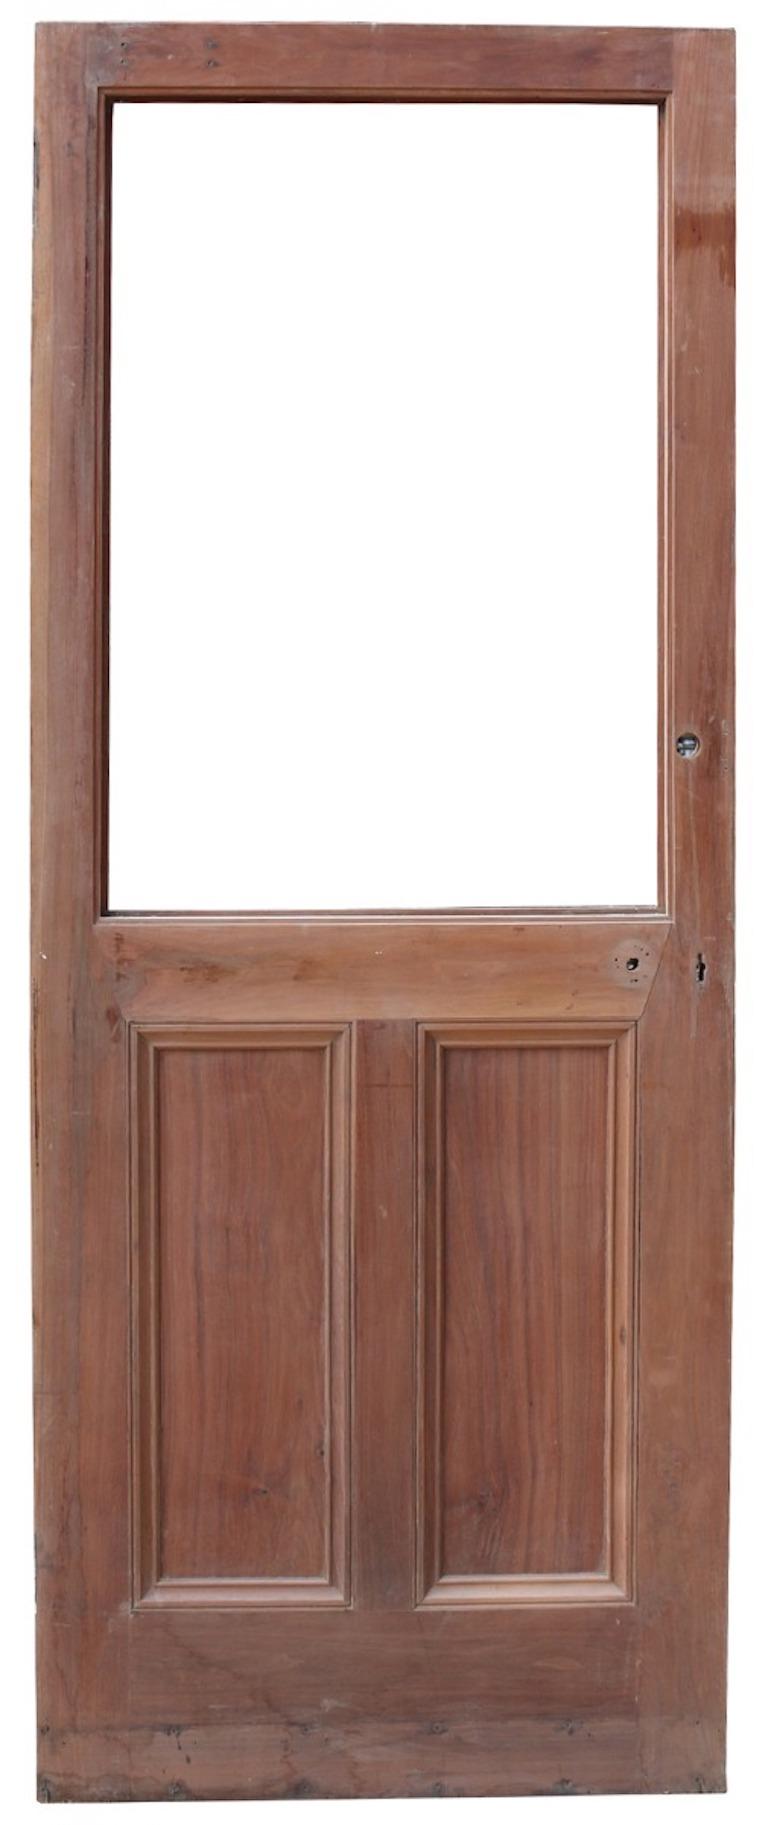 A reclaimed door constructed from solid Walnut, with space for a glazed panel.